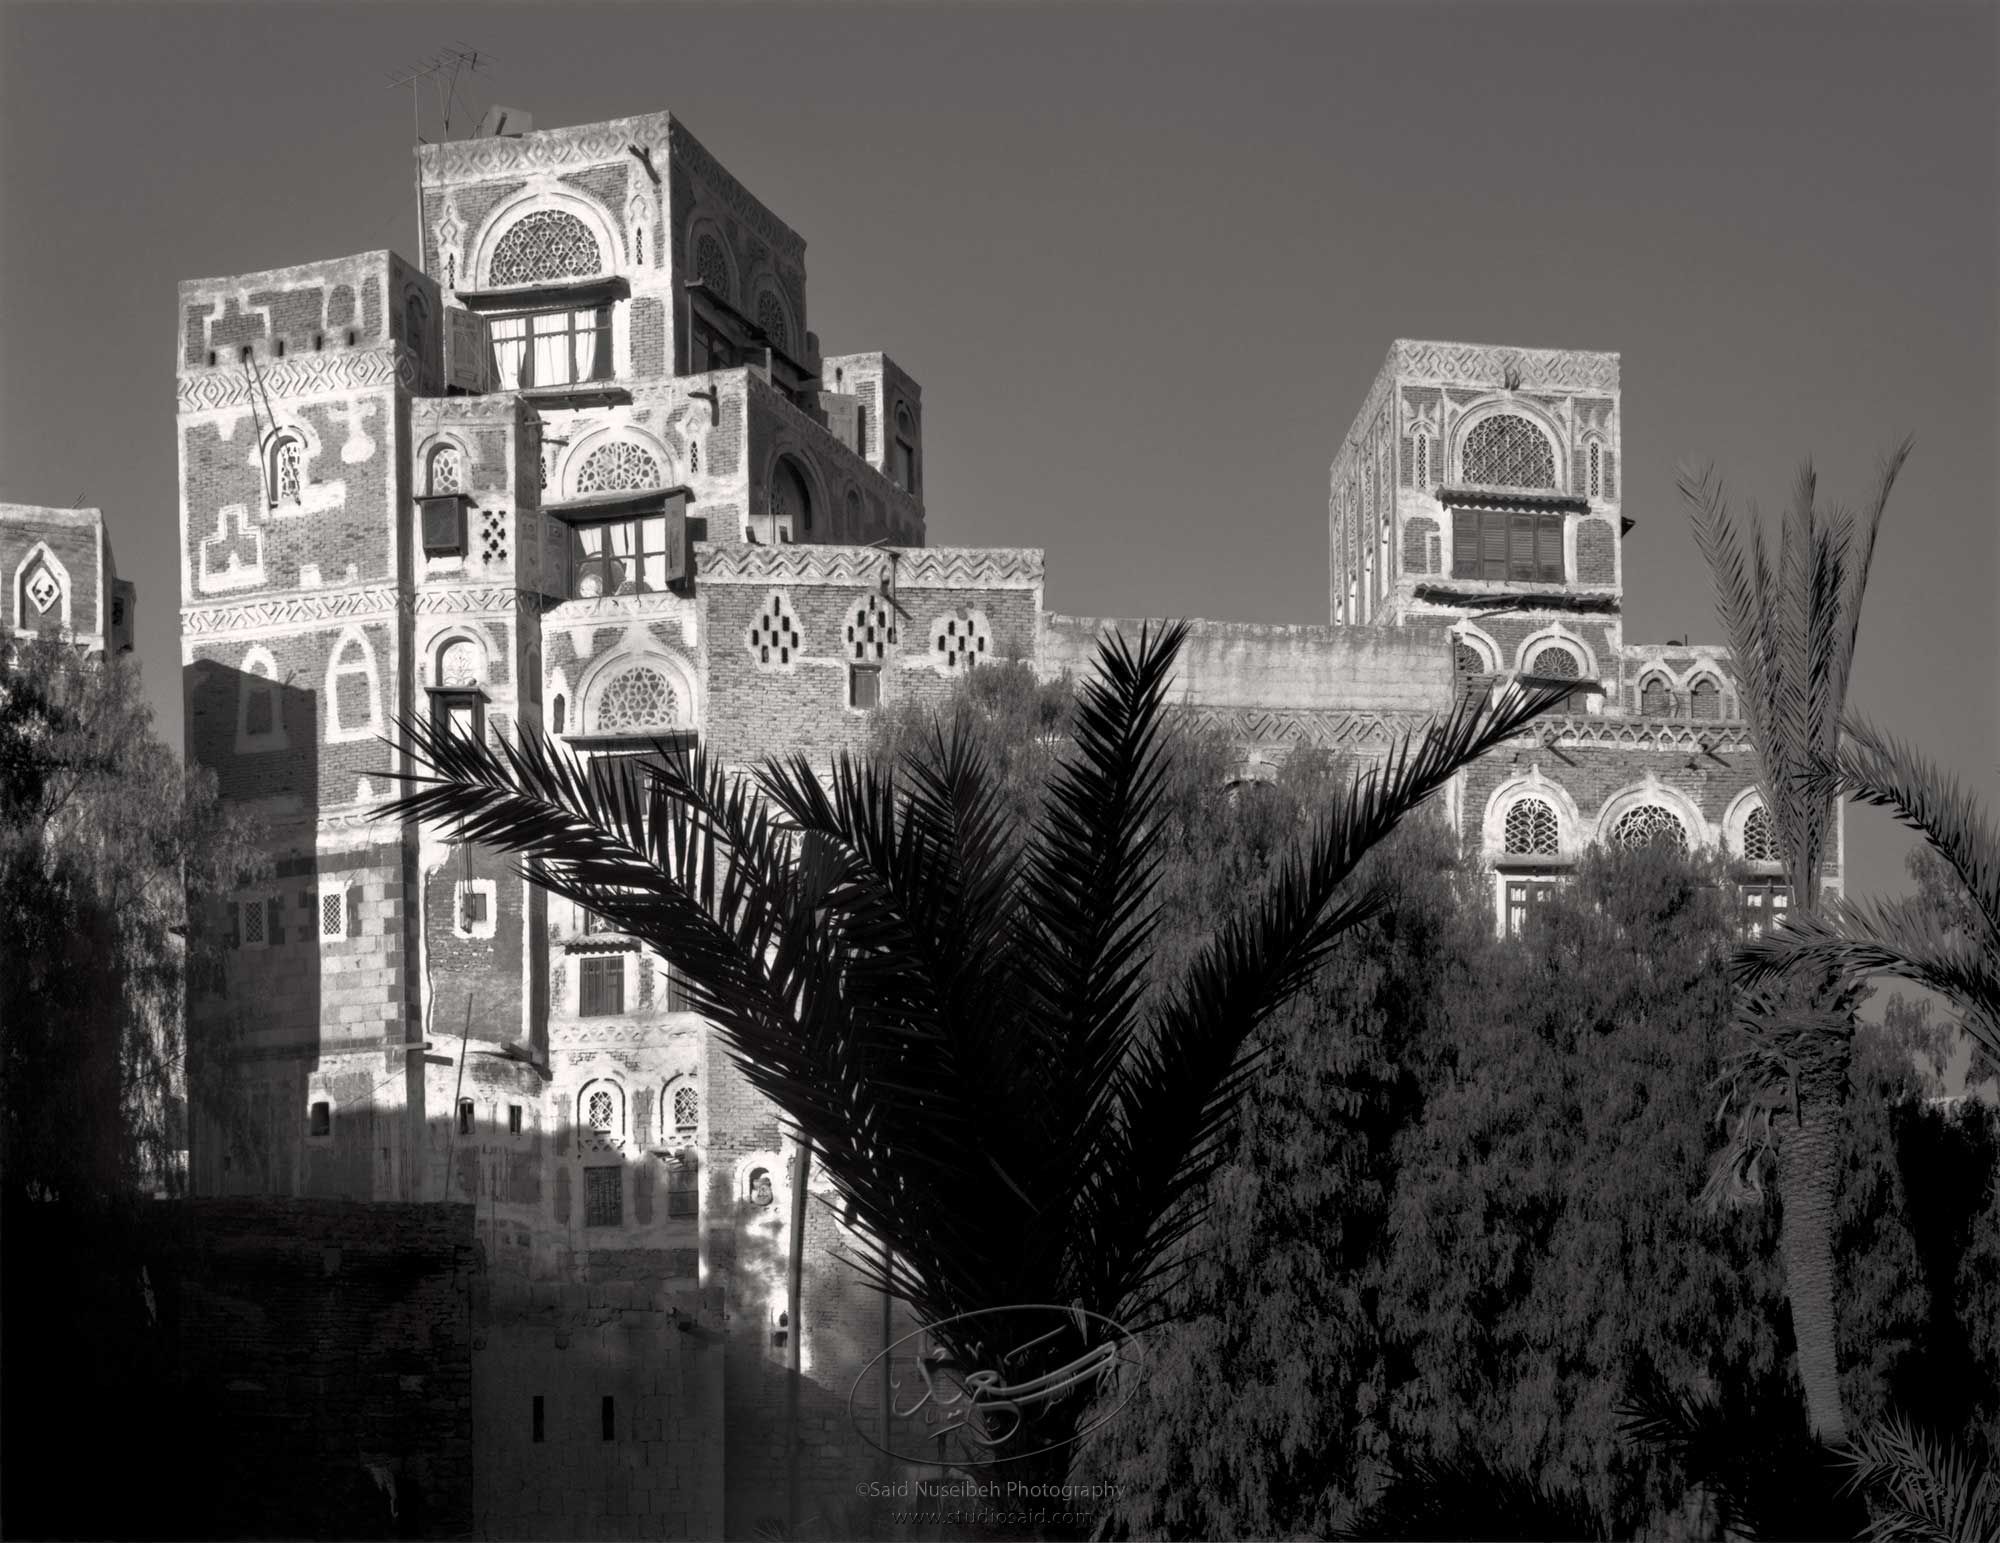 From shared community gardens, in the cnter of a circle of houses. Old City Sana'a